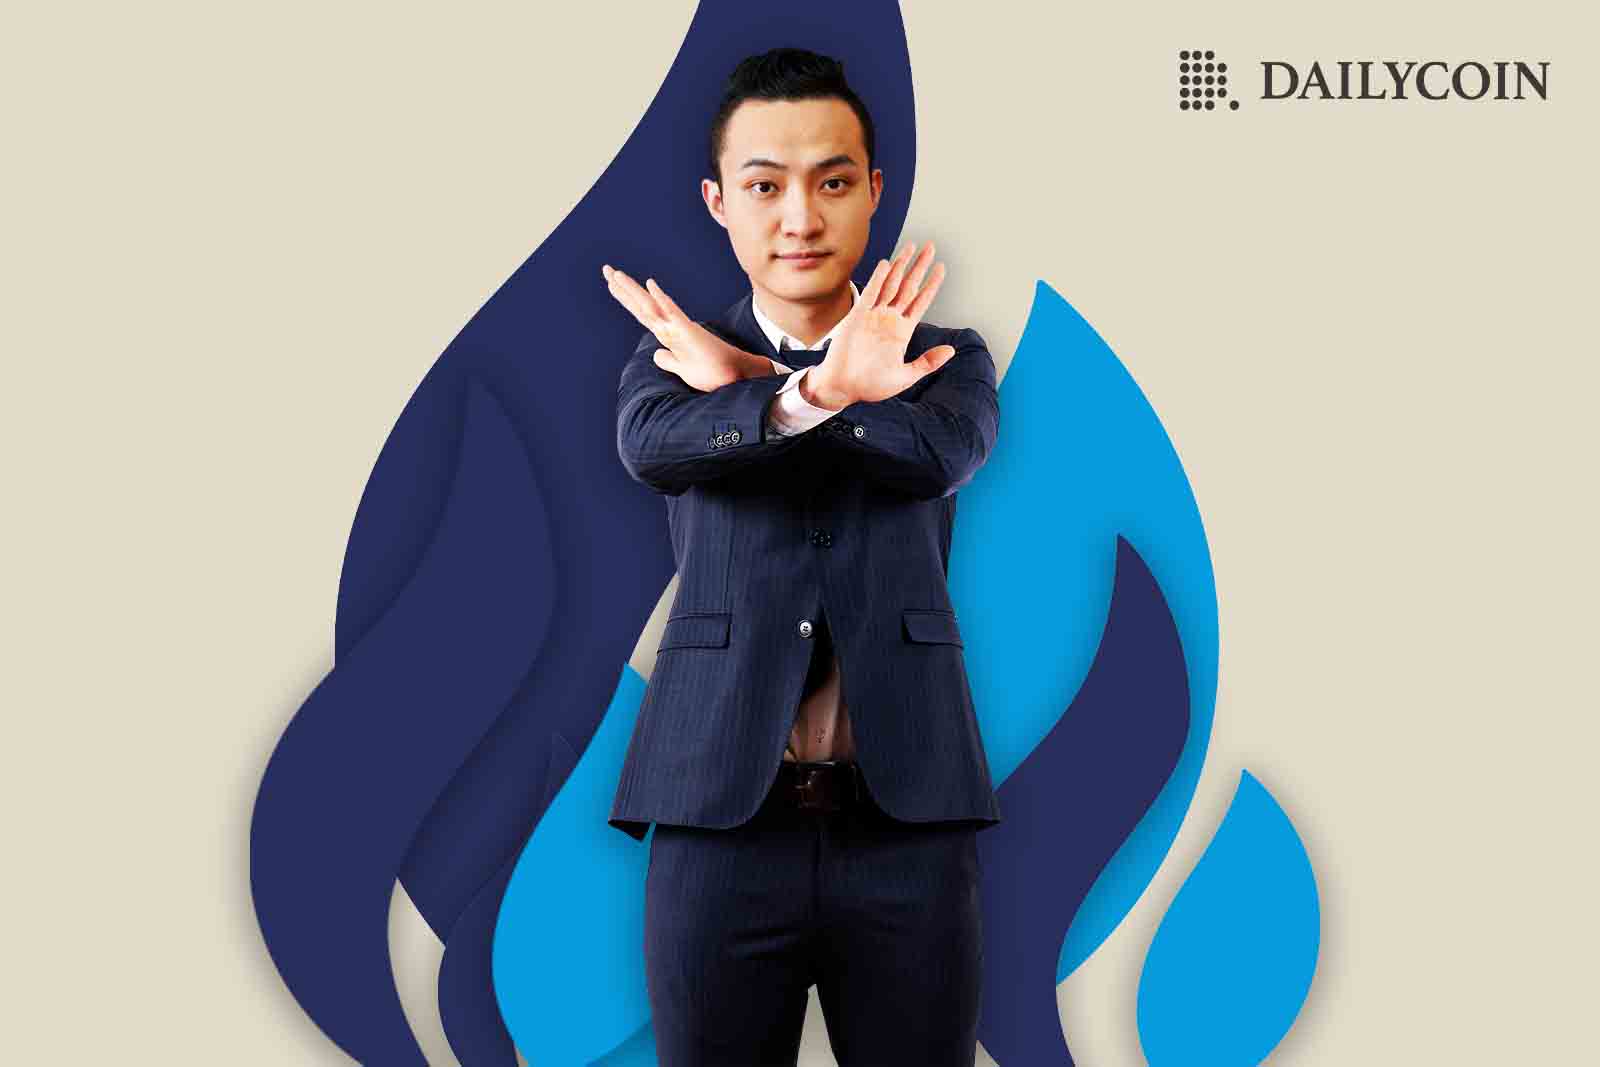 Justin Sun crossing his hands in opposition, symbolizing his denial of pitching Huobi to Binance.